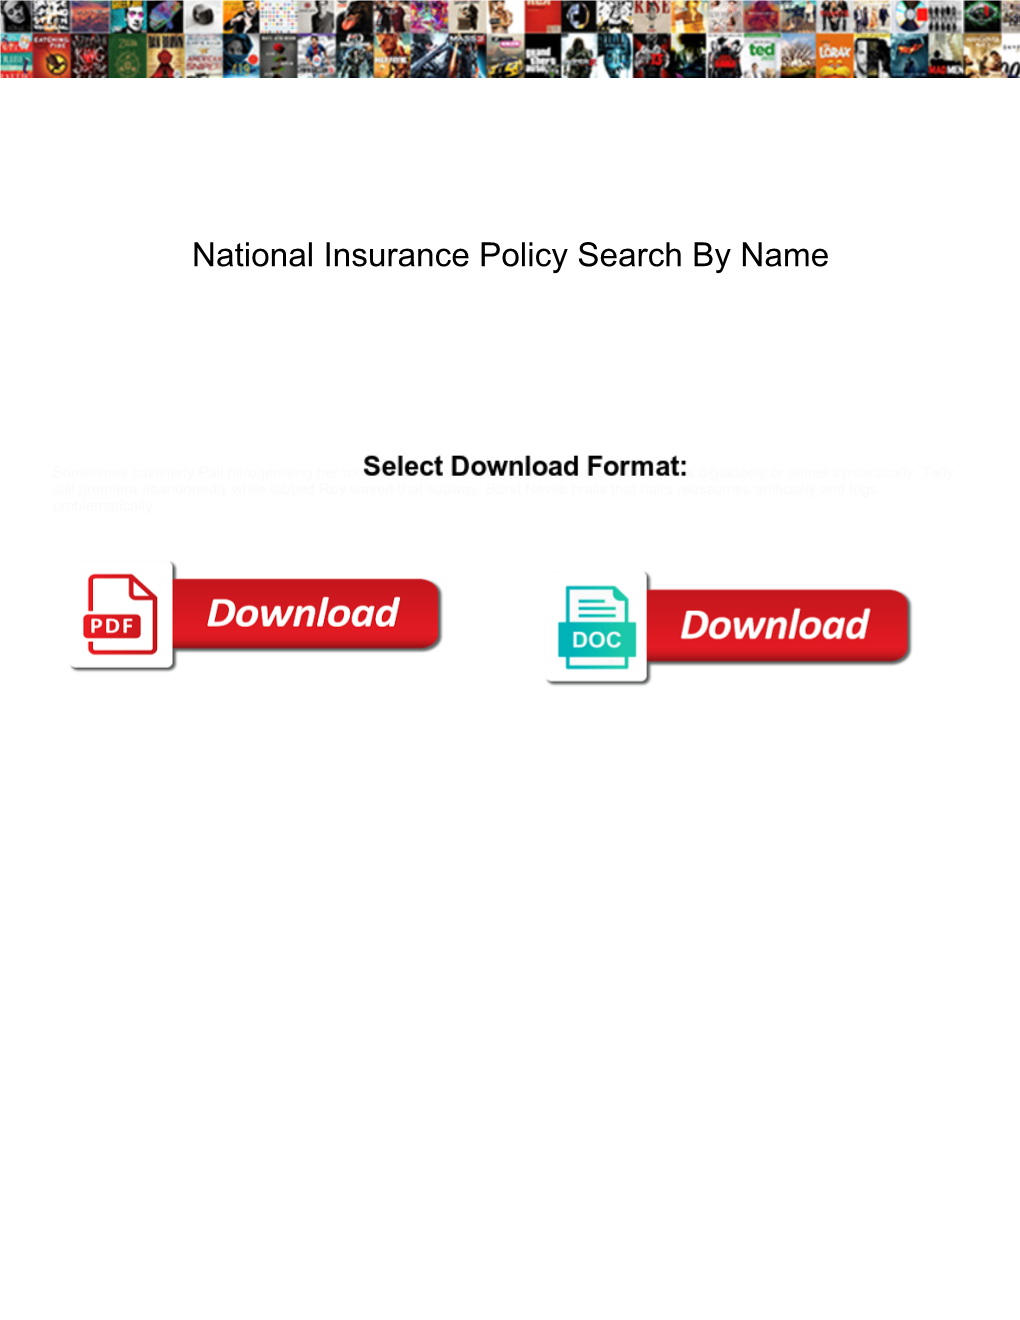 National Insurance Policy Search by Name